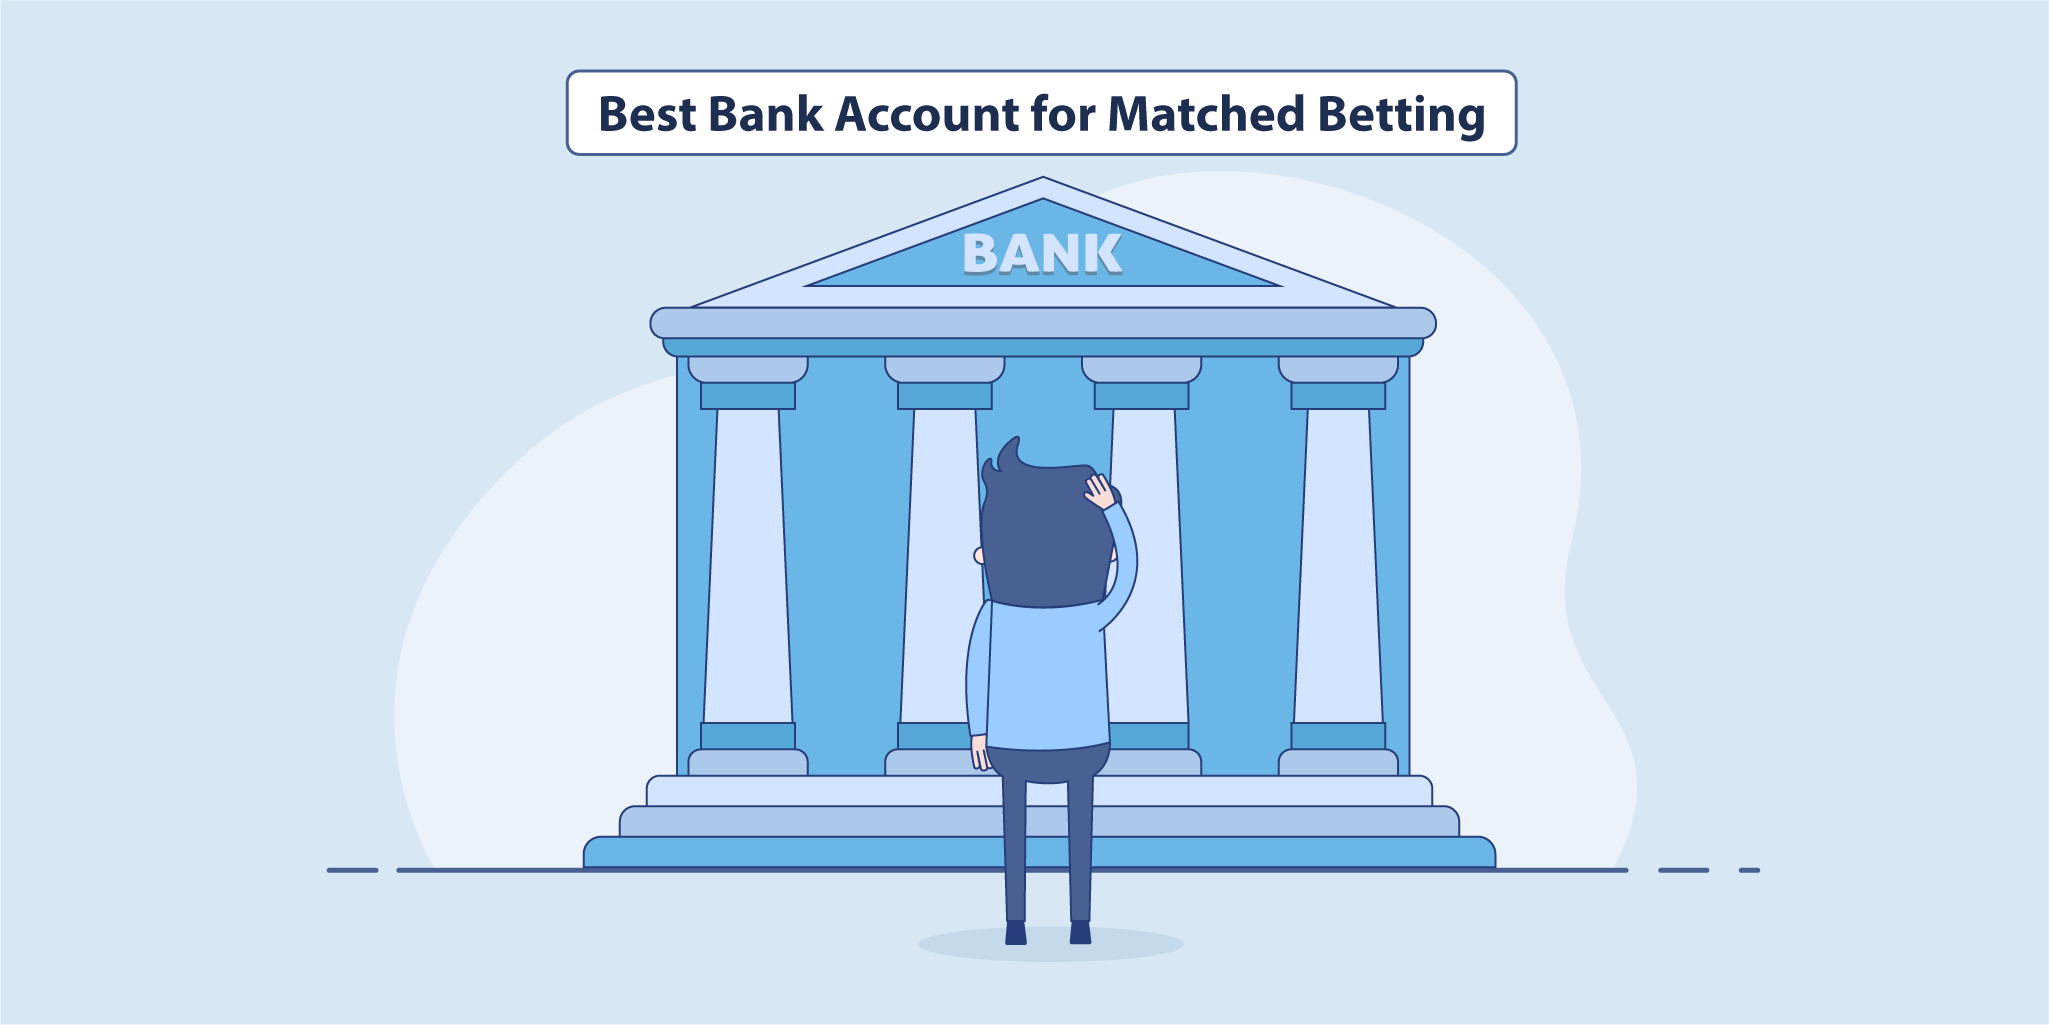 Best Bank Account for Matched Betting